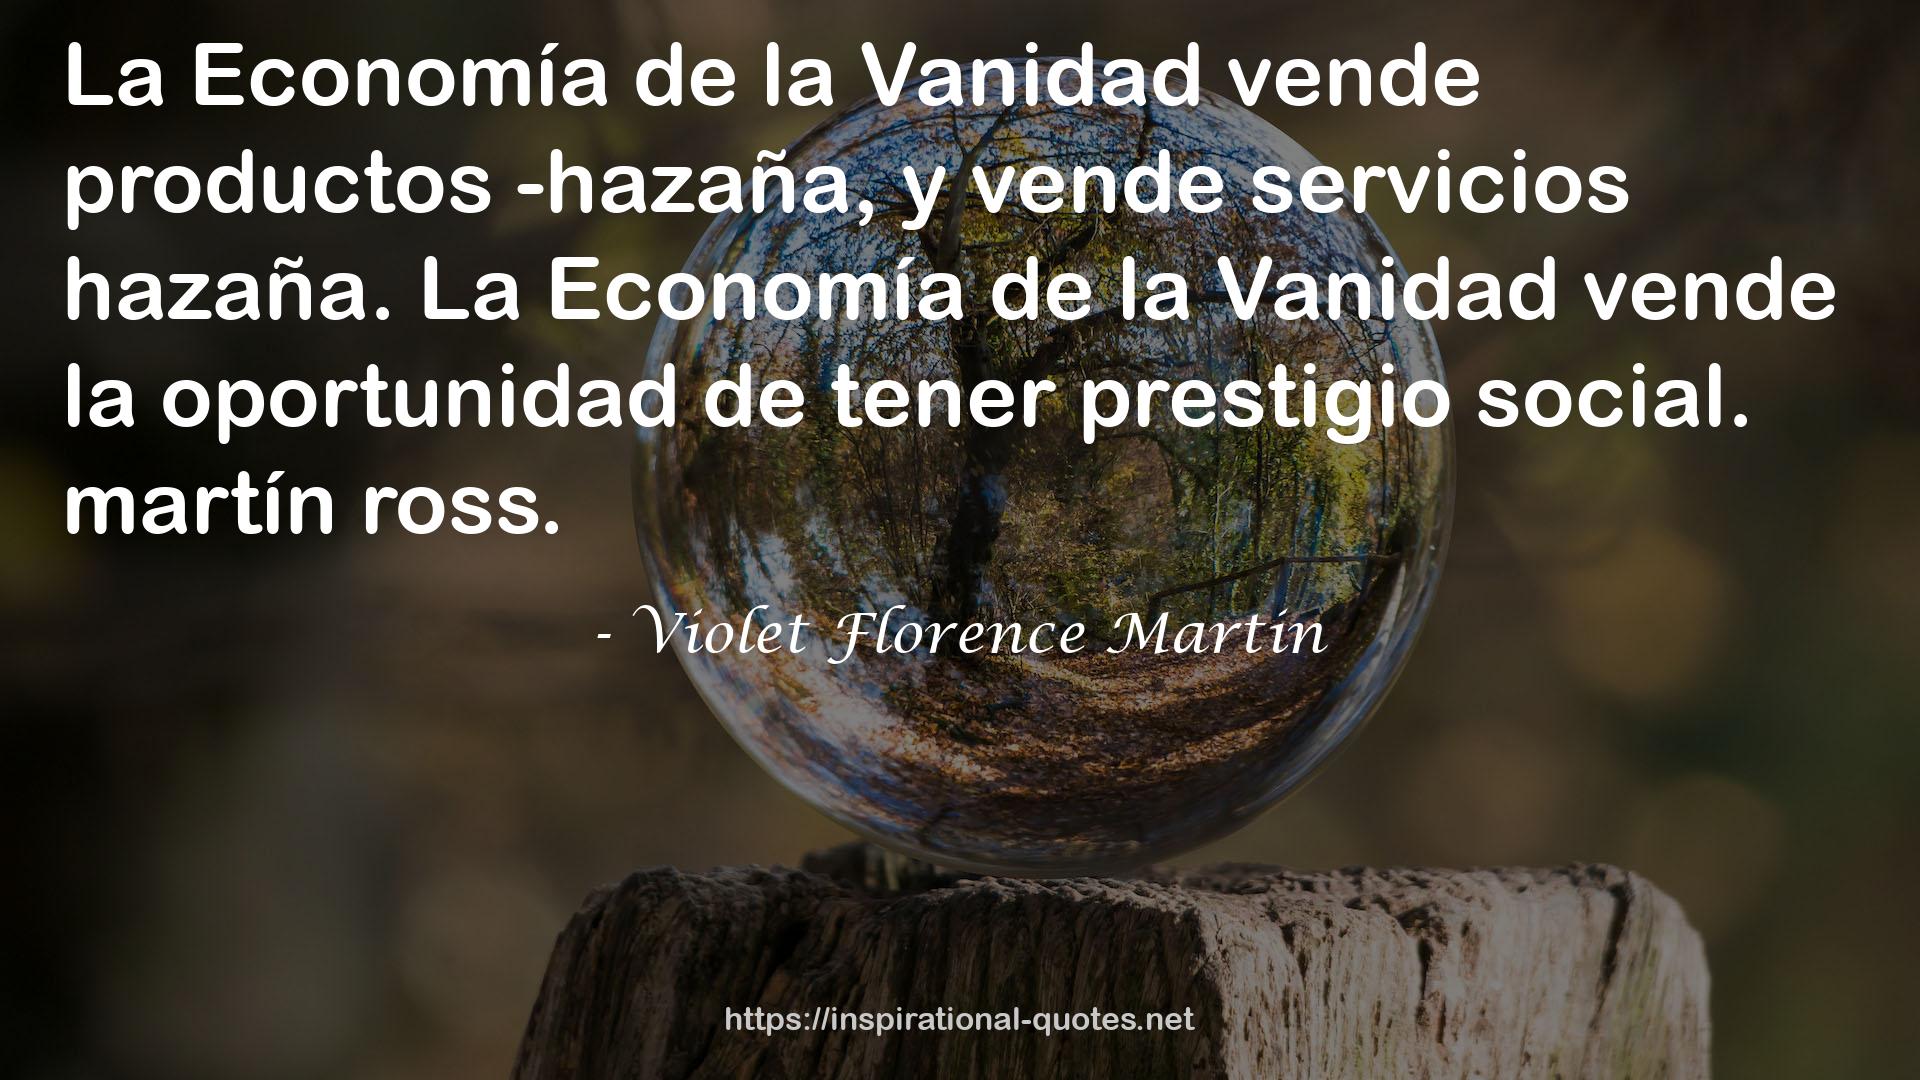 Violet Florence Martin QUOTES